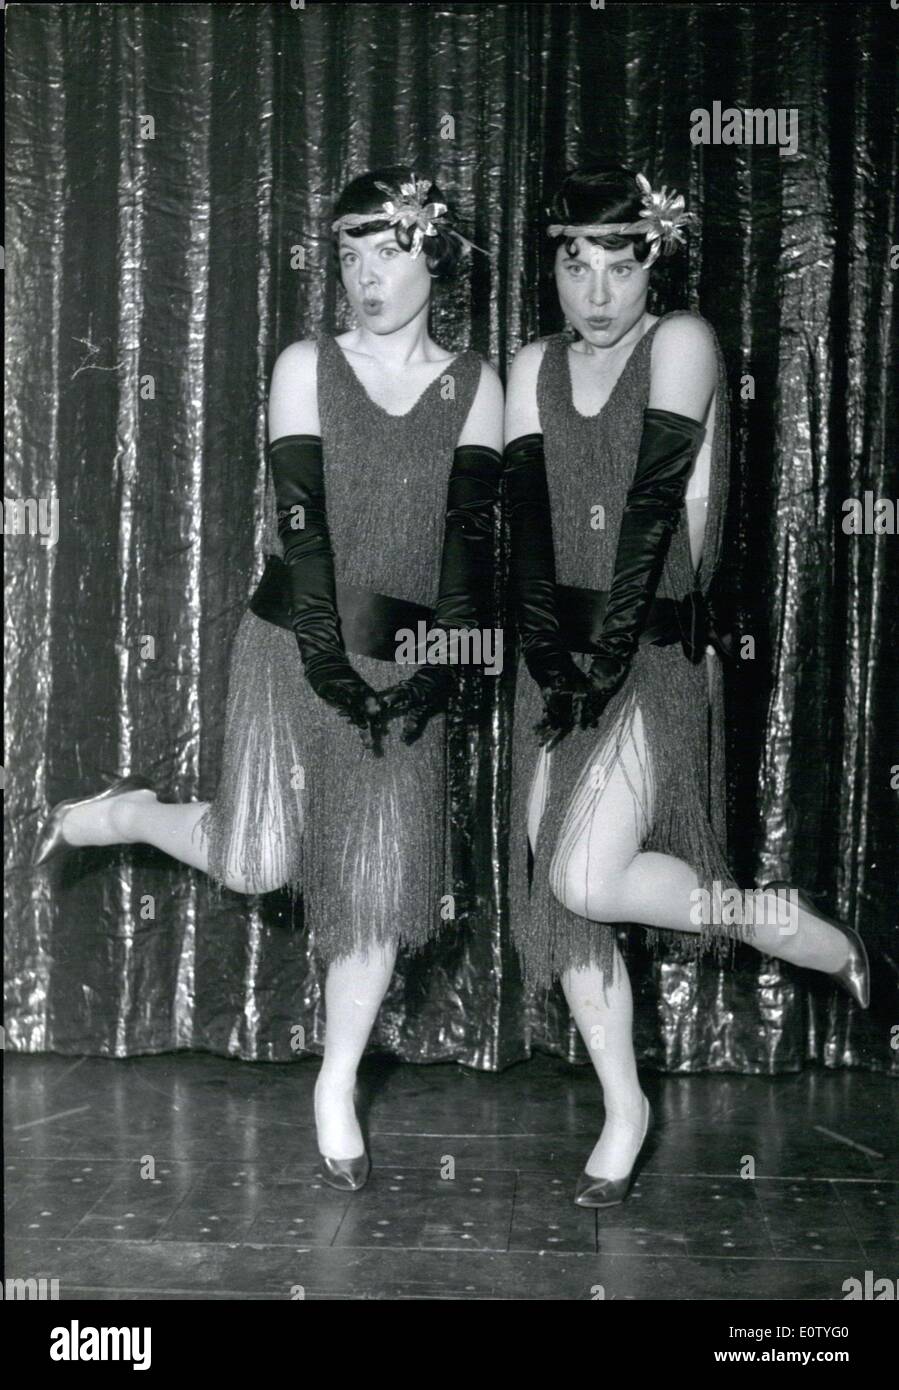 Oct. 08, 1960 - Brigitta and Helga Borkowsky, 22 year-old twins from Poland will be singing and dancing in Paris under the name Stock Photo